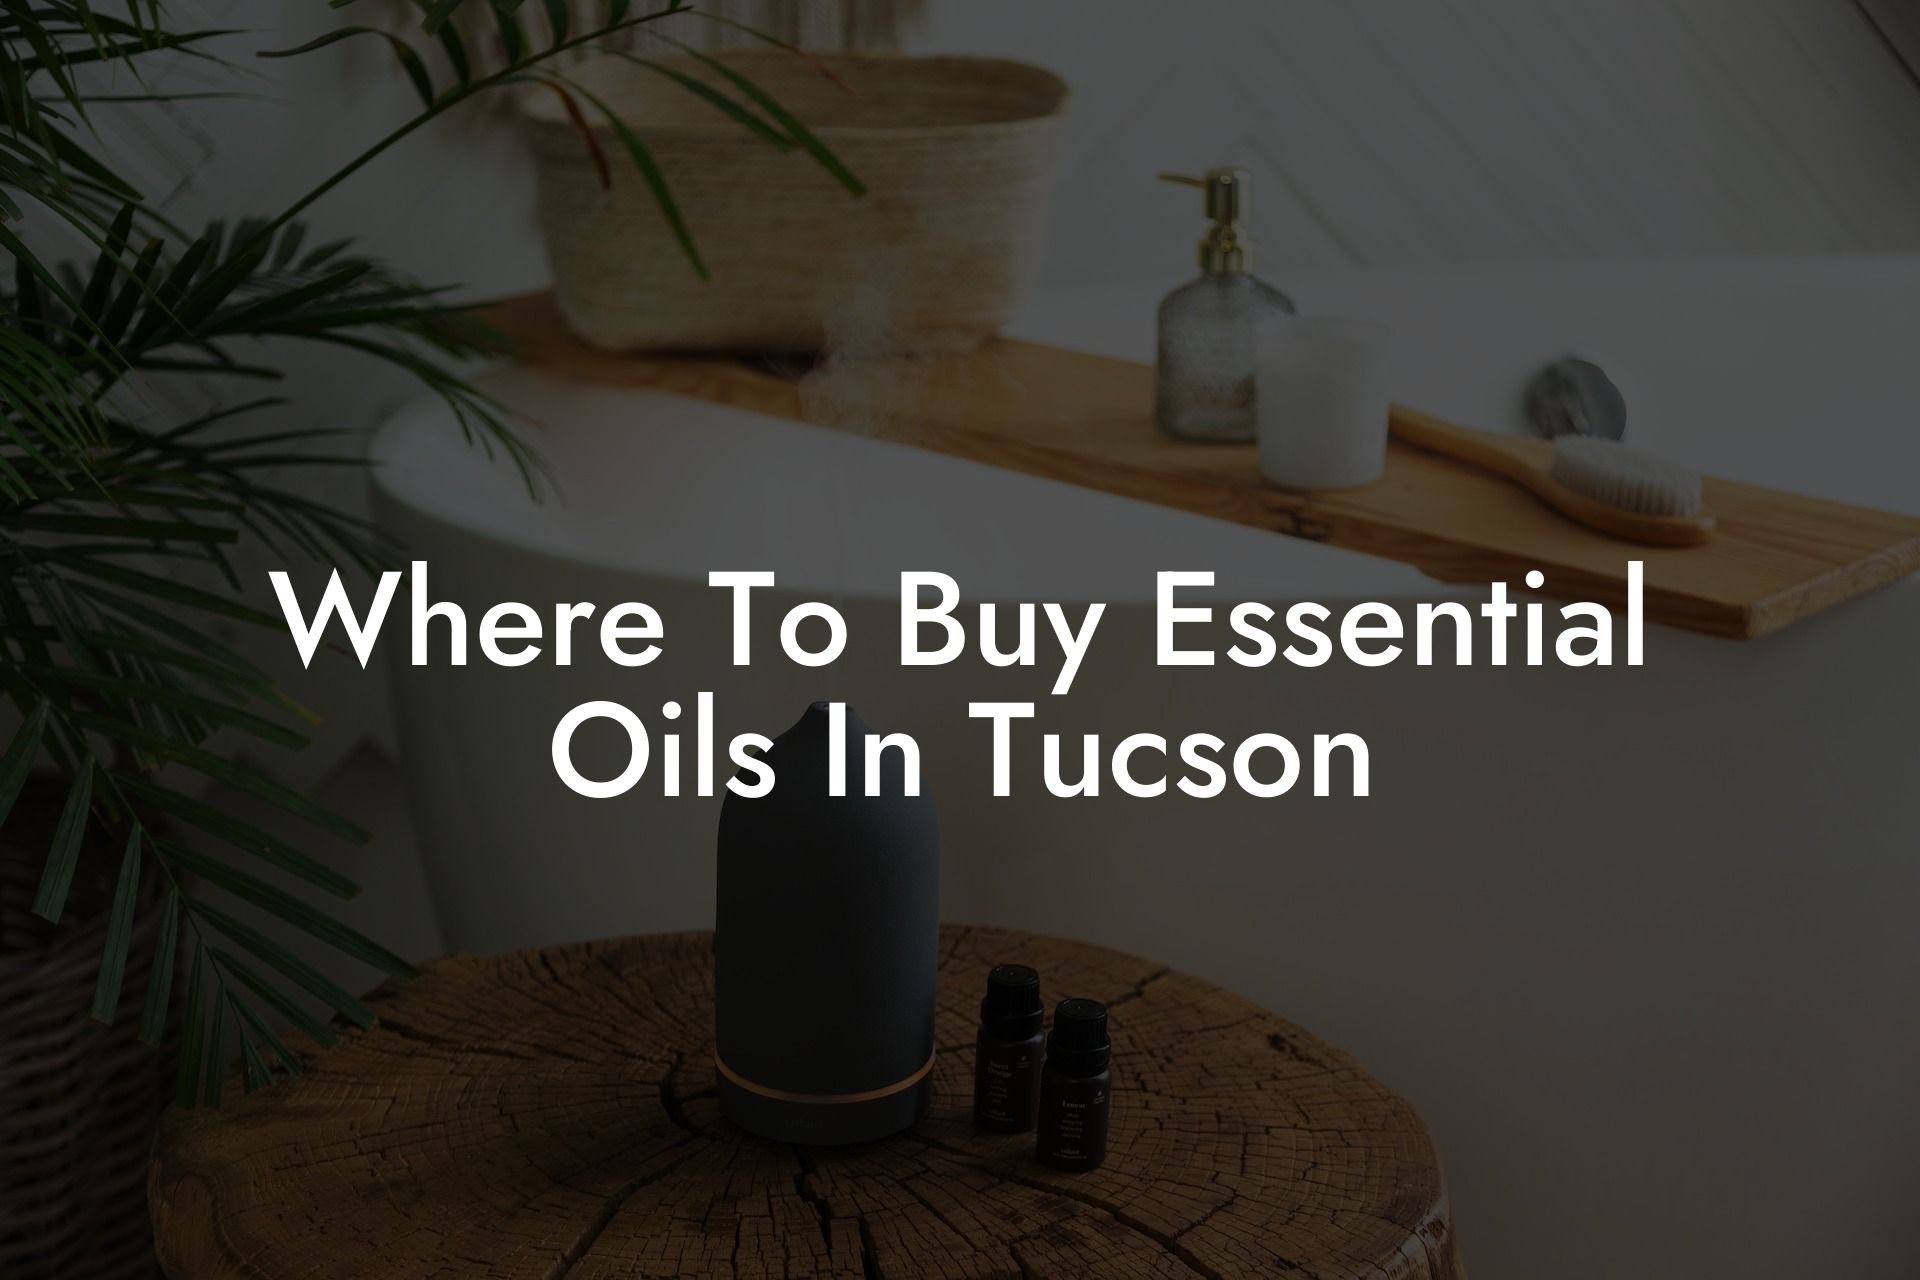 Where To Buy Essential Oils In Tucson